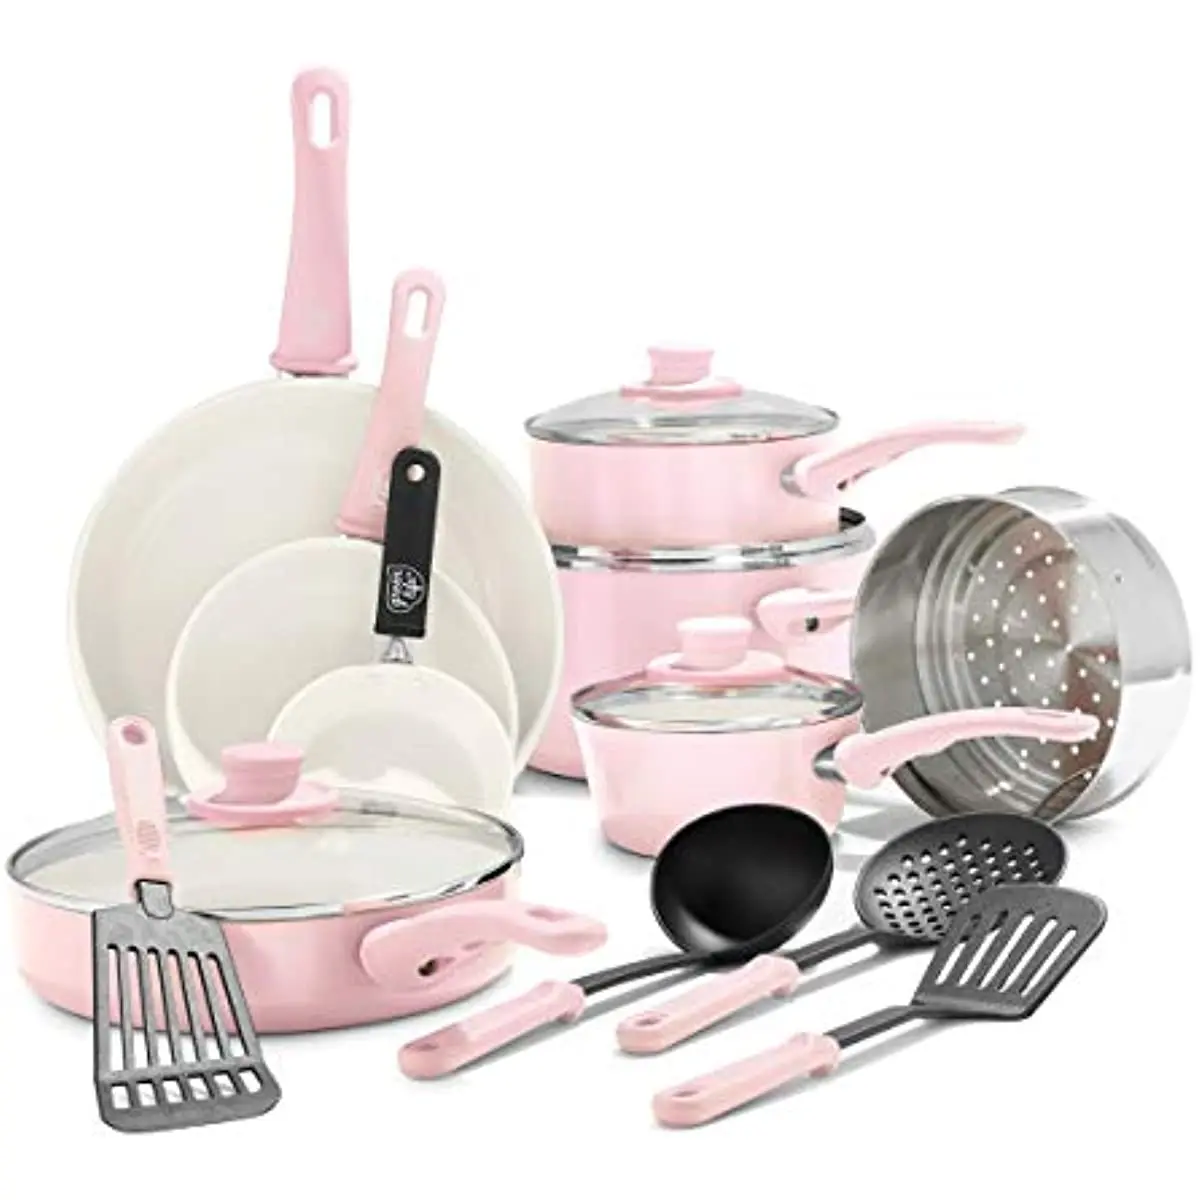 

GreenLife Soft Grip Healthy Ceramic Nonstick, 16 Piece Cookware Pots and Pans Set, PFAS-Free, Dishwasher Safe, Soft Pink